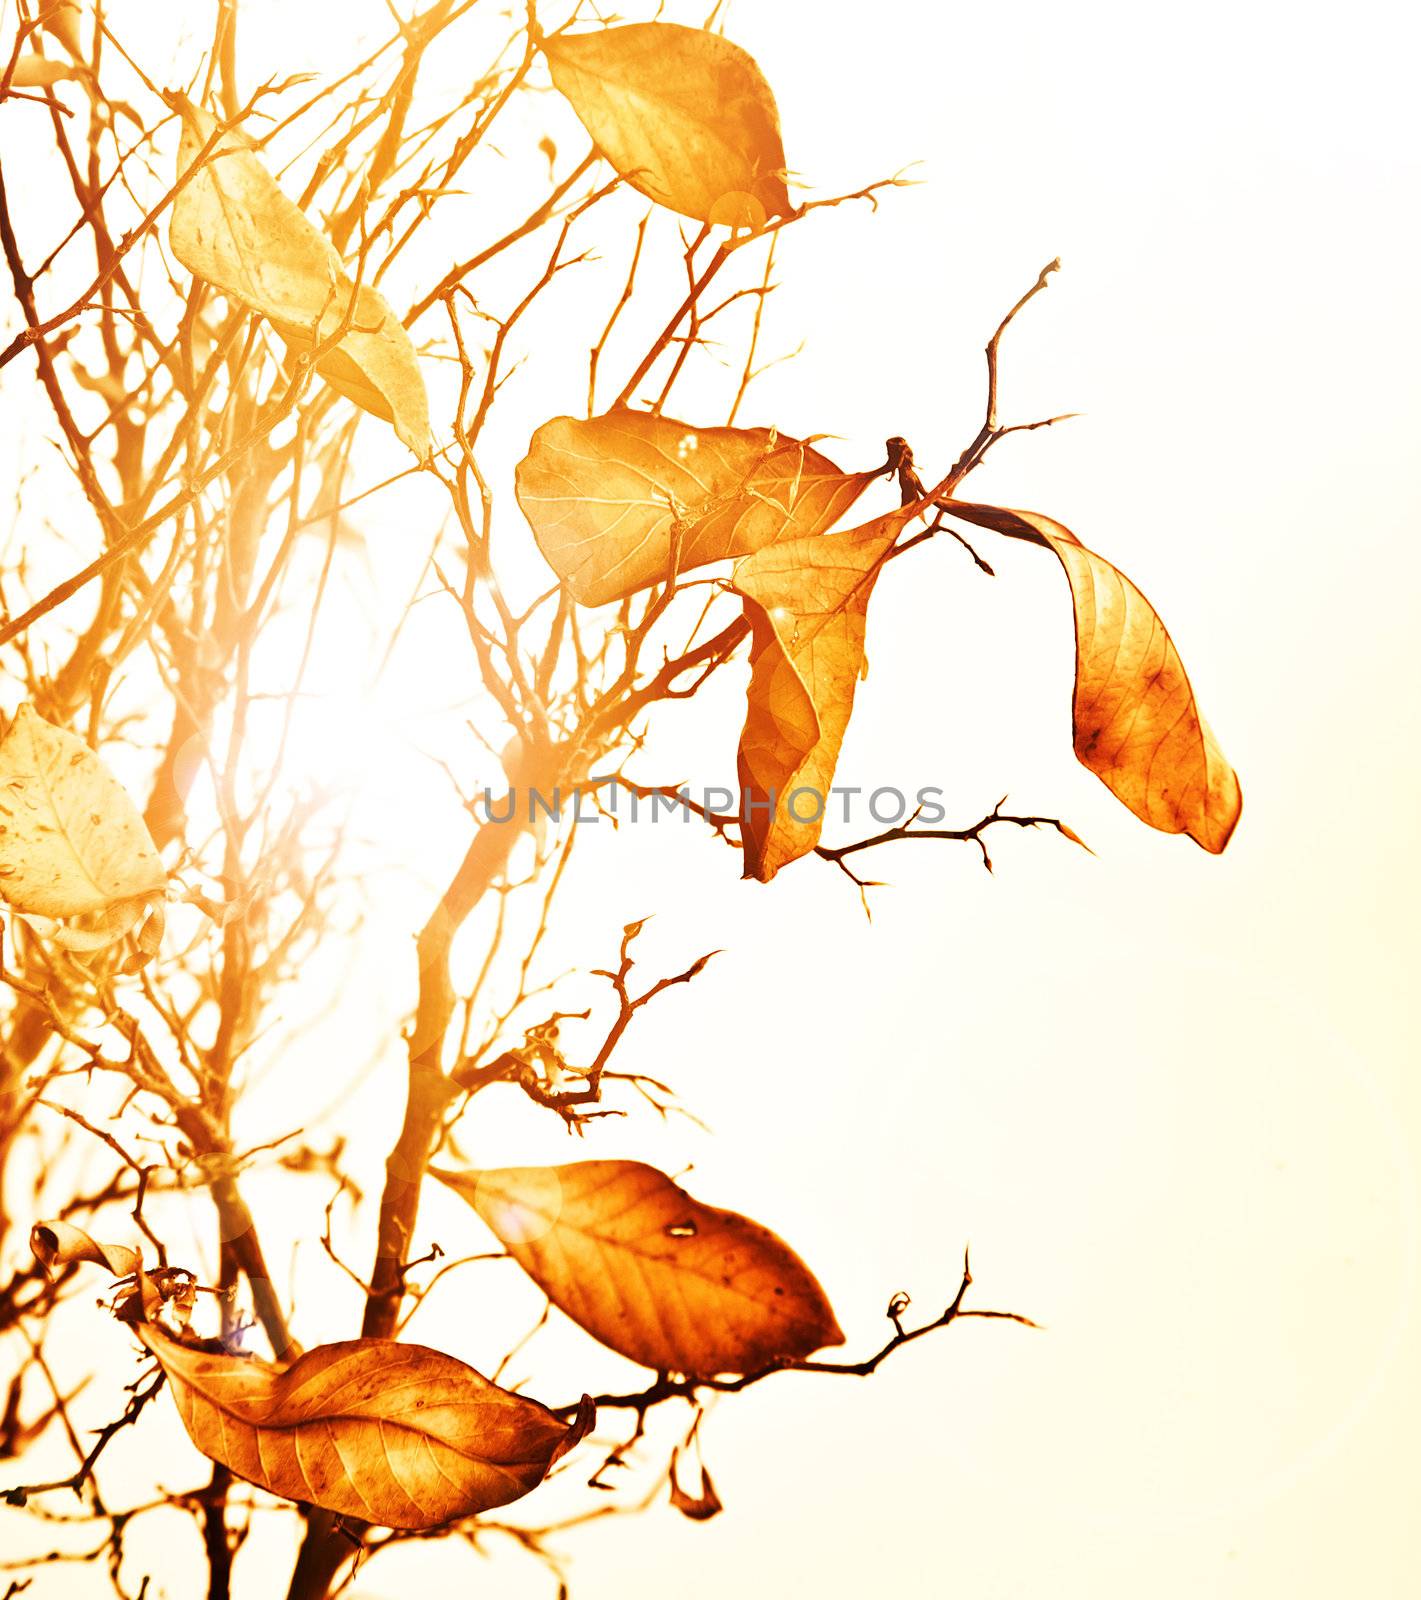 Autumn leaves background by Anna_Omelchenko